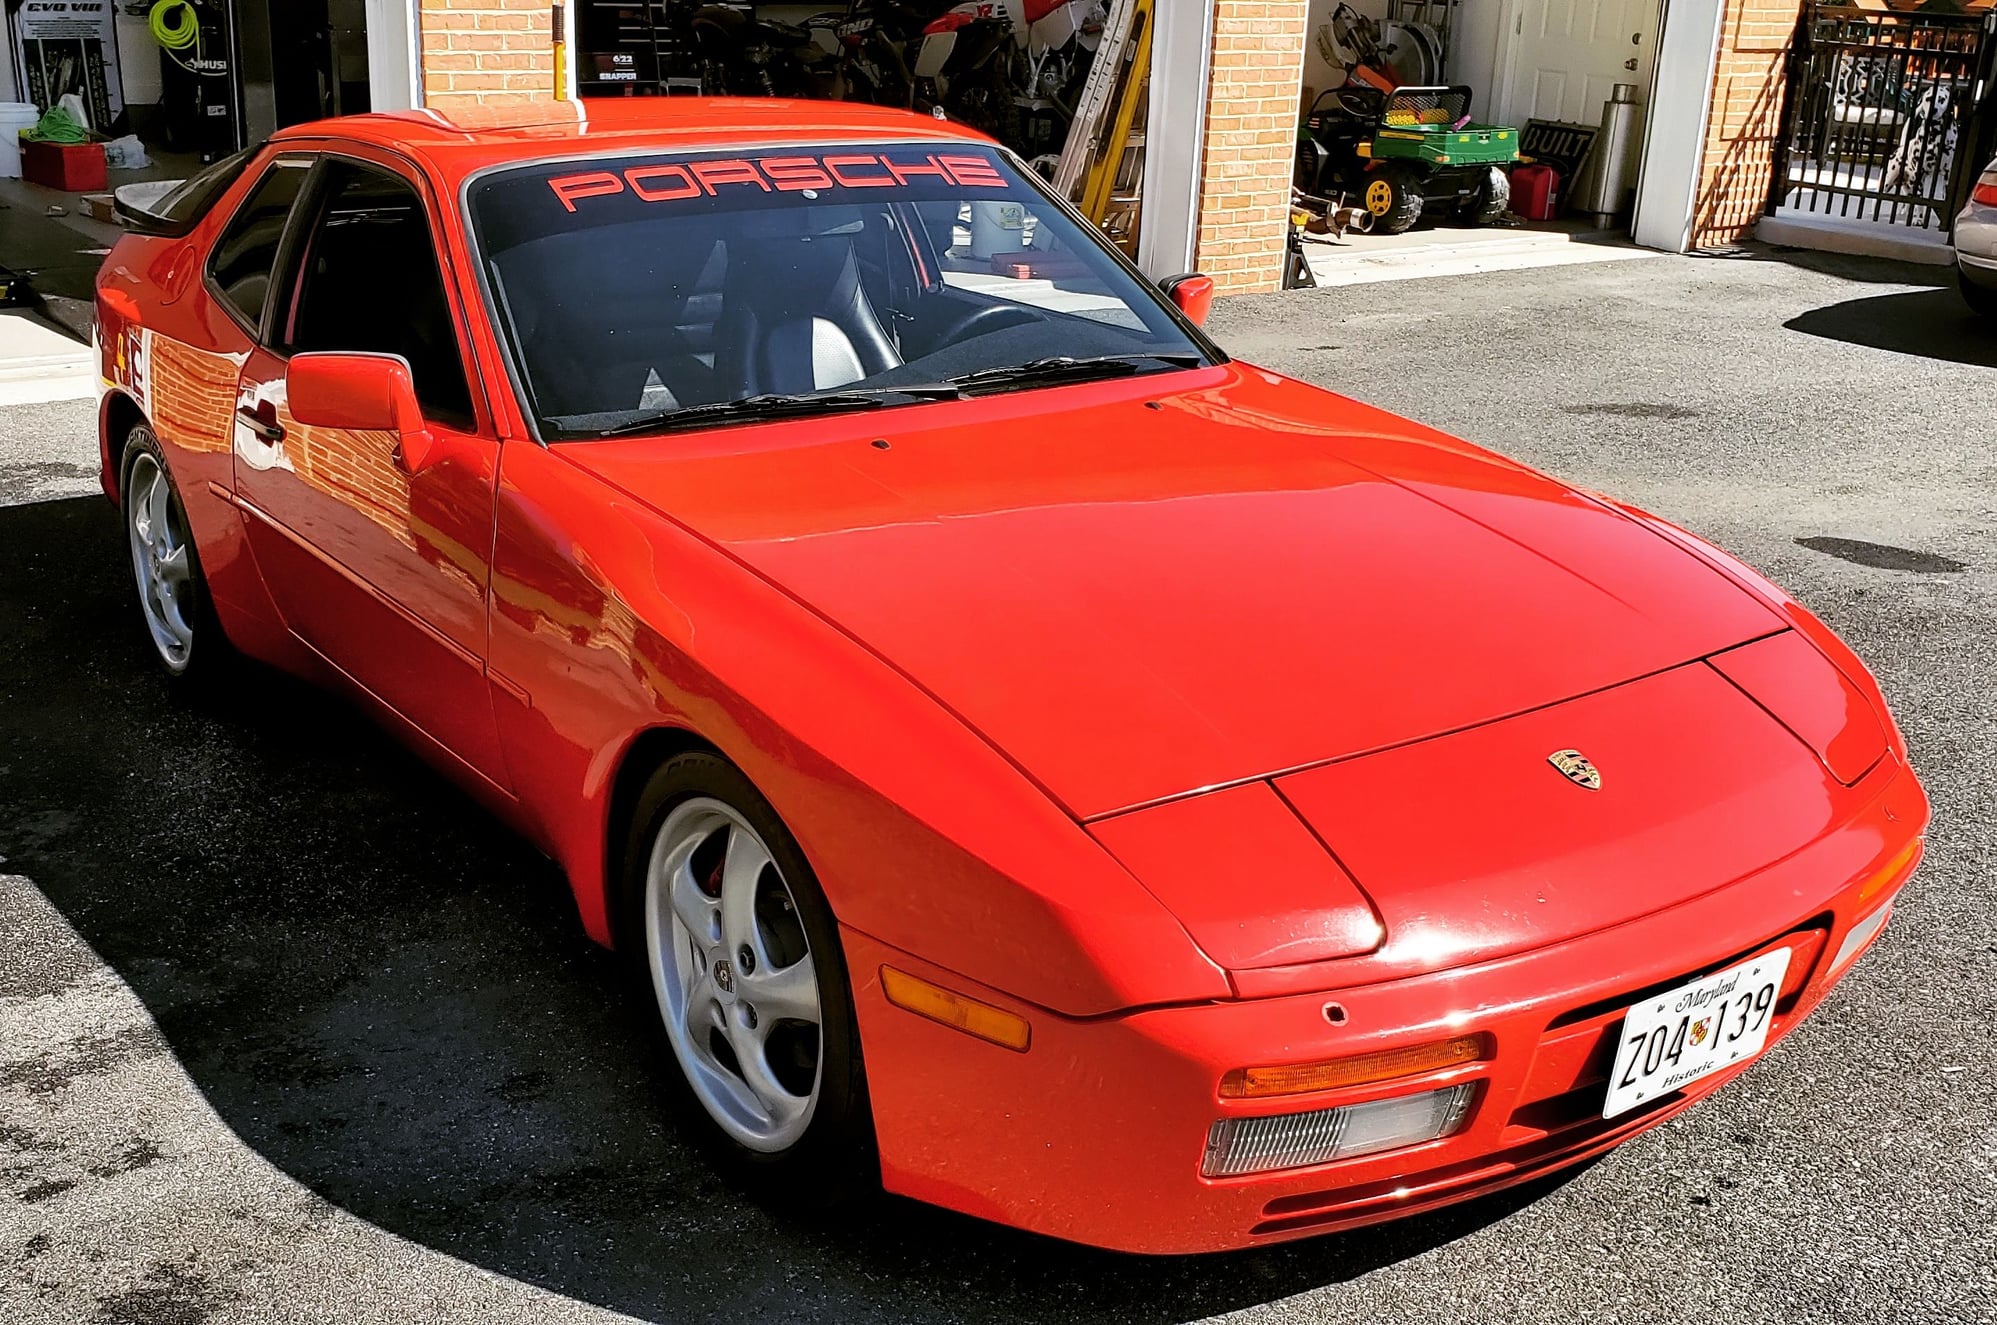 1987 Porsche 944 - 1987 944 turbo - Used - VIN WP0AA2956HN152570 - 145,000 Miles - 4 cyl - 2WD - Manual - Coupe - Red - Jarrettsville, MD 21084, United States